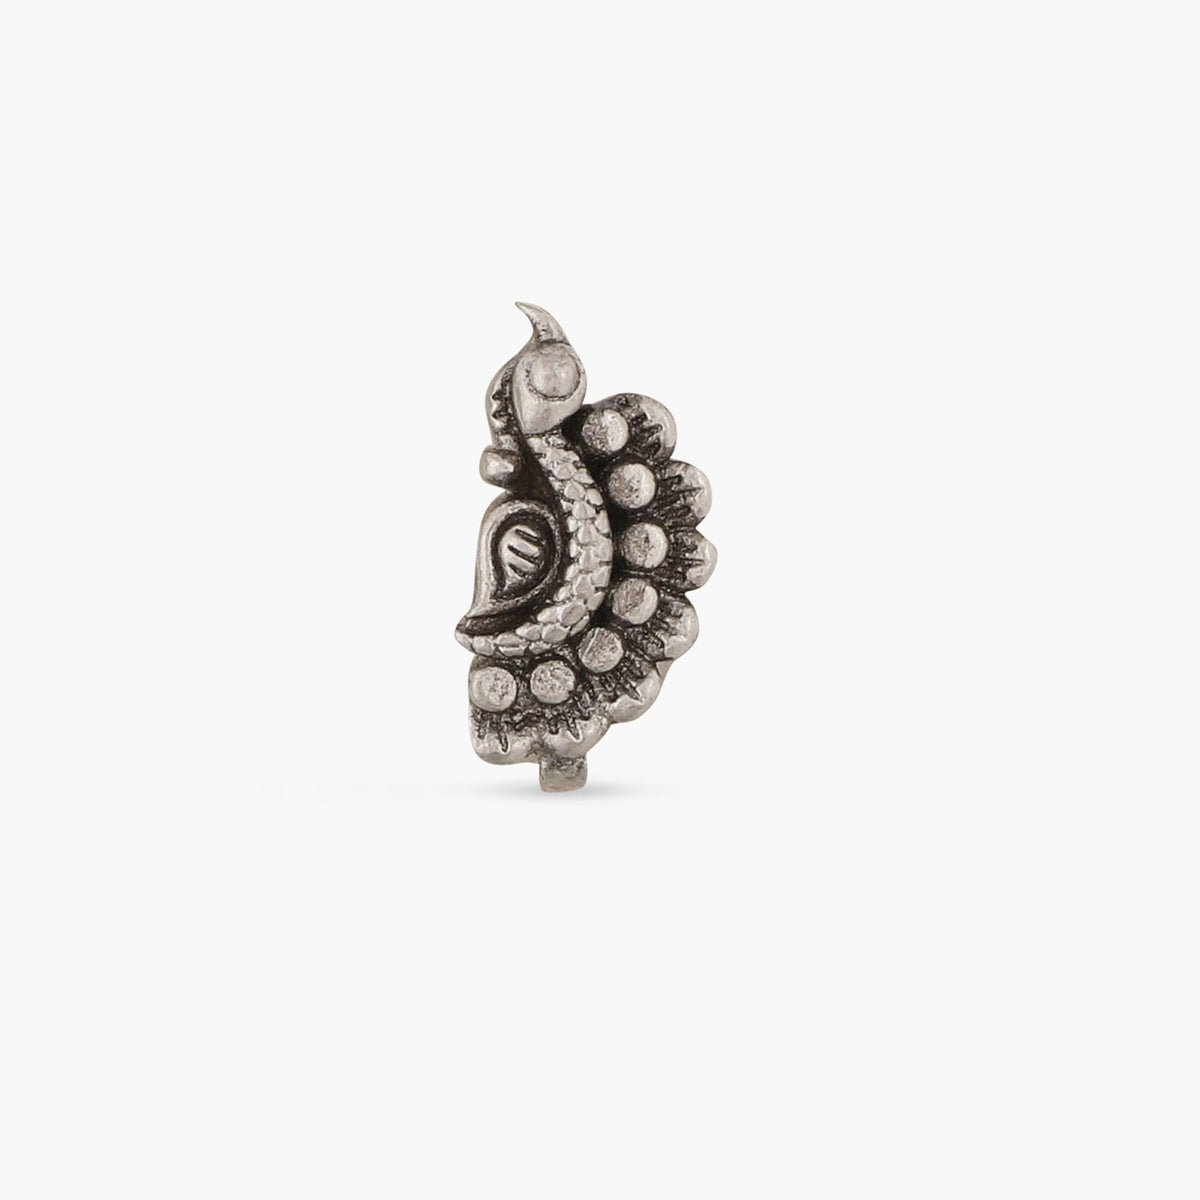 Maati Peacock Floral Antique Oxidized Nose Pin